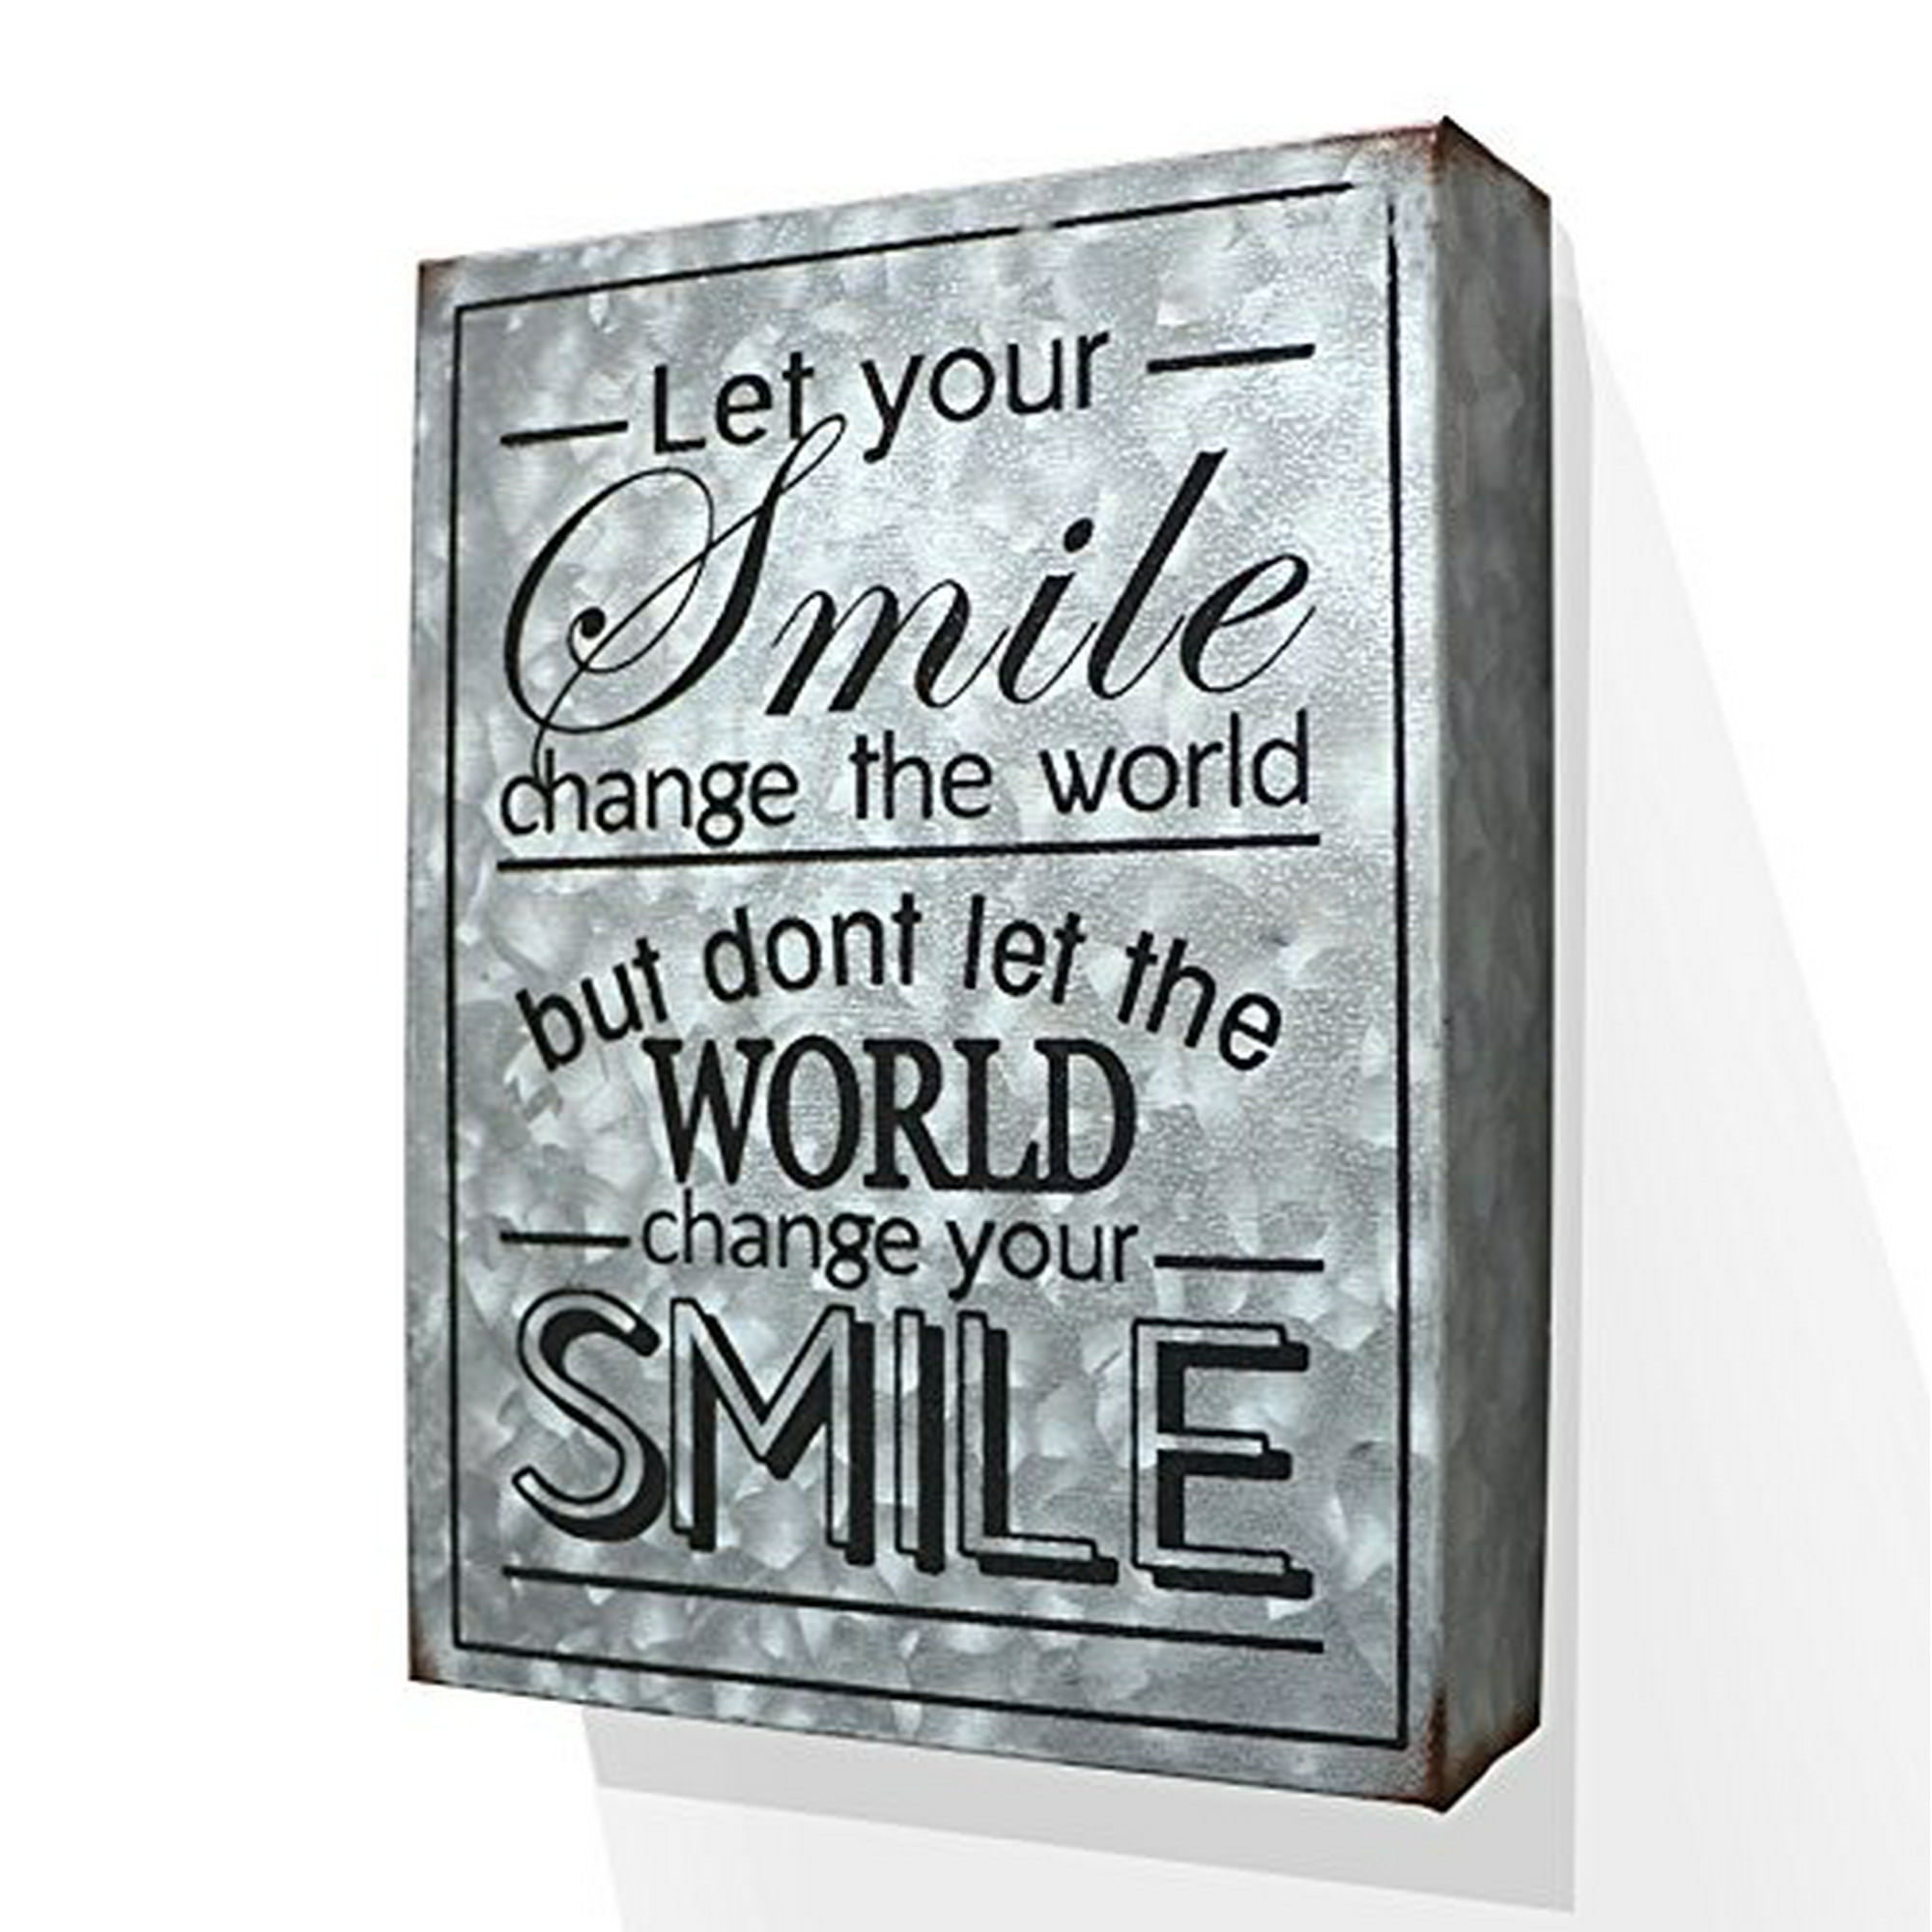 Barnyard Designs Let Your Smile Change The World Galvanized Metal Box Wall Art Sign Primitive Country Farmhouse Home Decor Sign With Sayings 8 X 6 Walmart Com Walmart Com